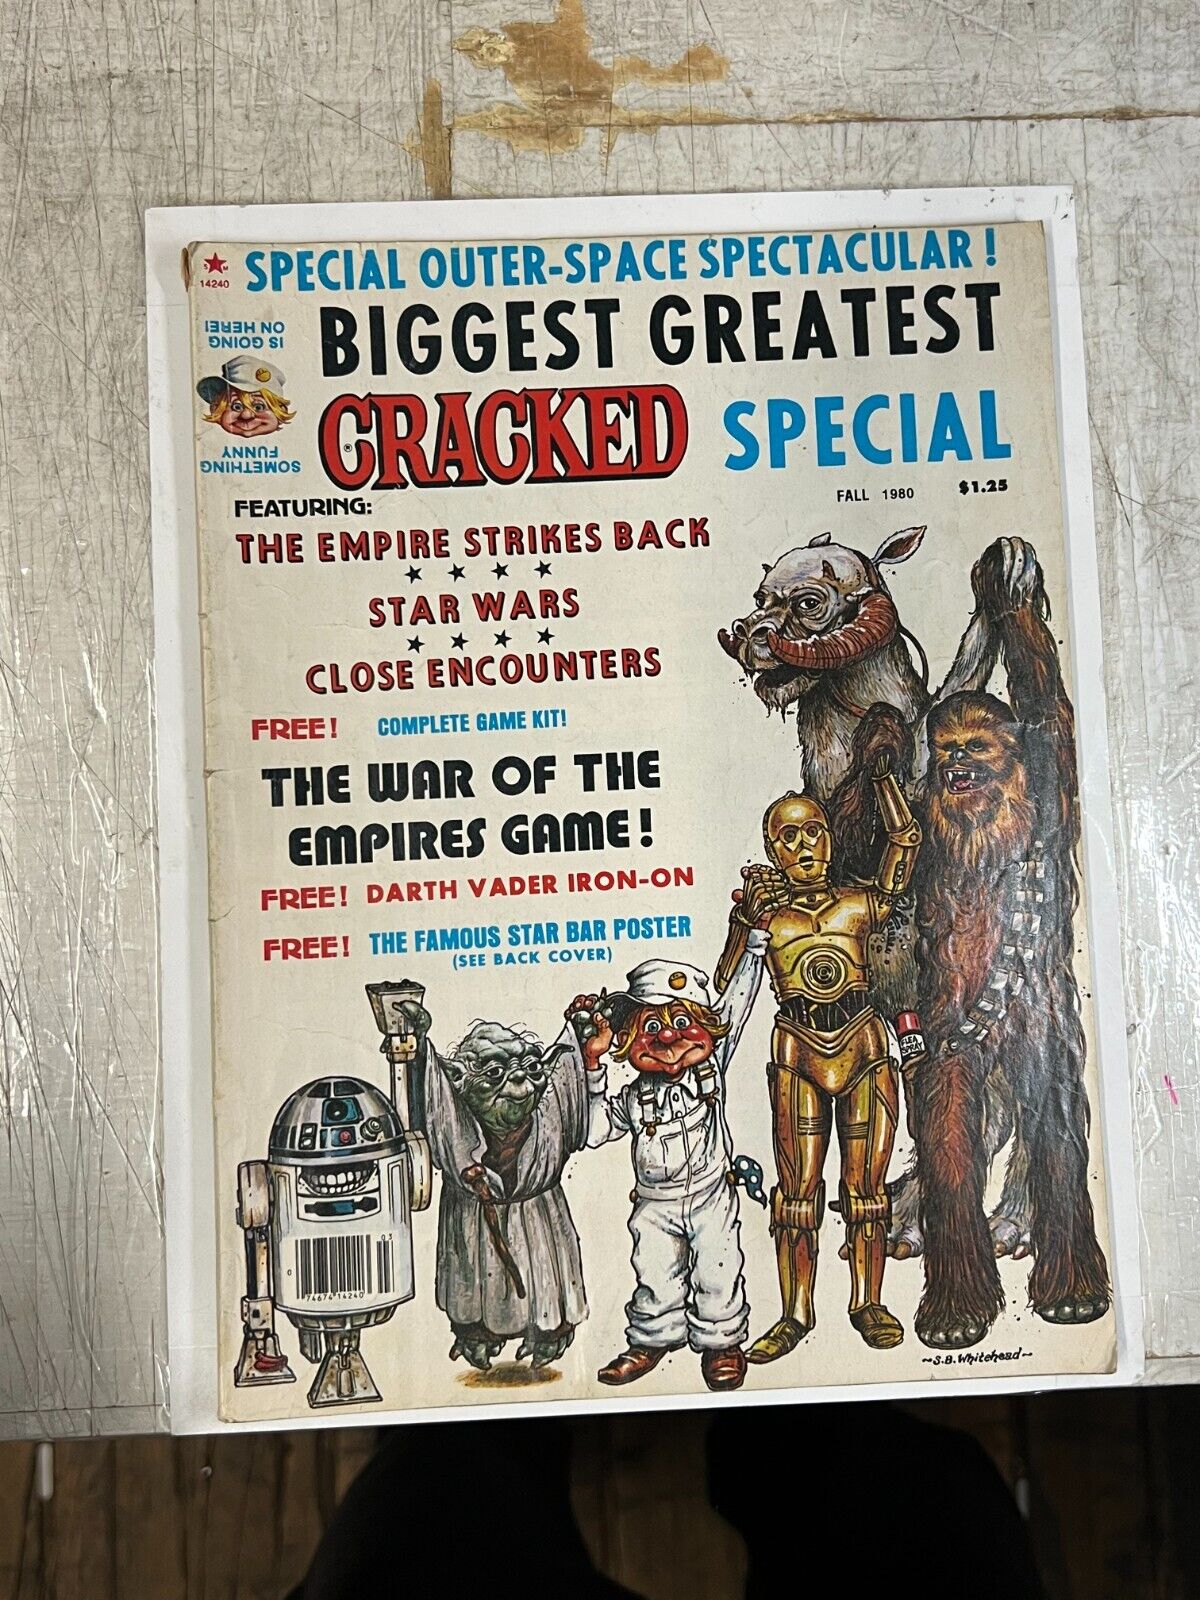 CRACKED MAGAZINE 1980 BIGGEST GREATEST SPECIAL OUTER-SPACE SPECTACULAR | Combine